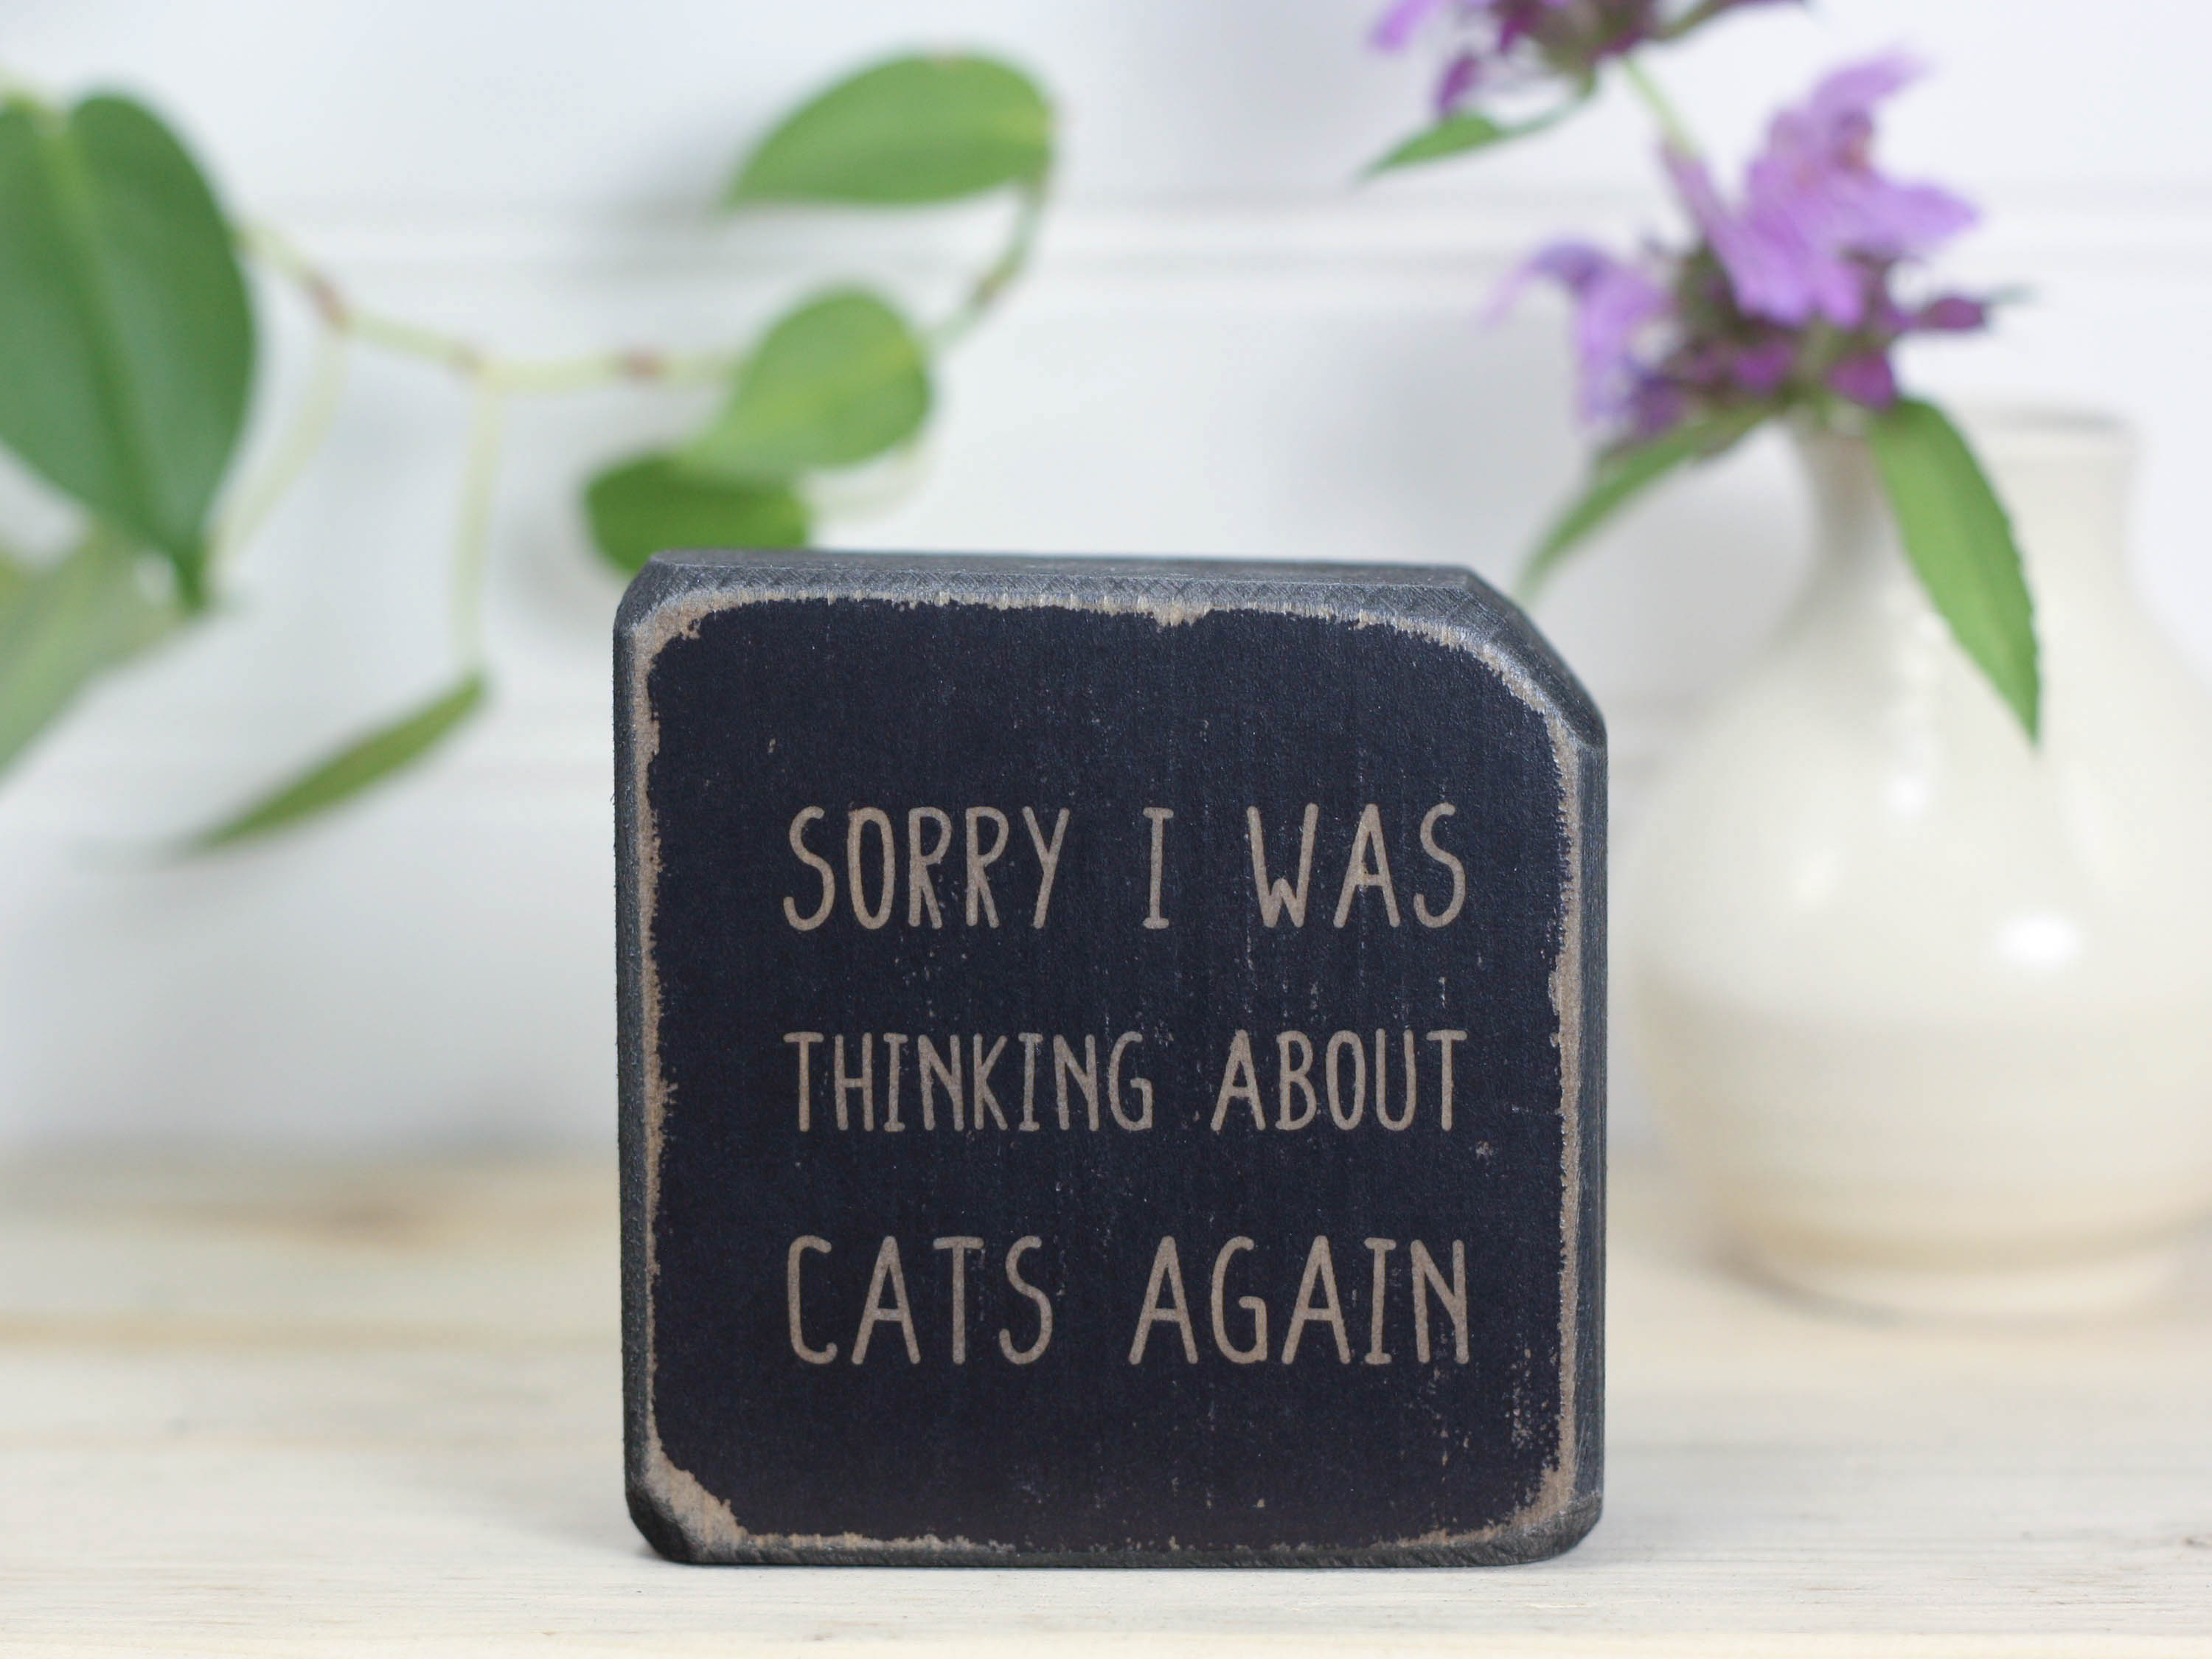 Mini wood sign in distressed black with the saying "Sorry I was thinking about cats again".